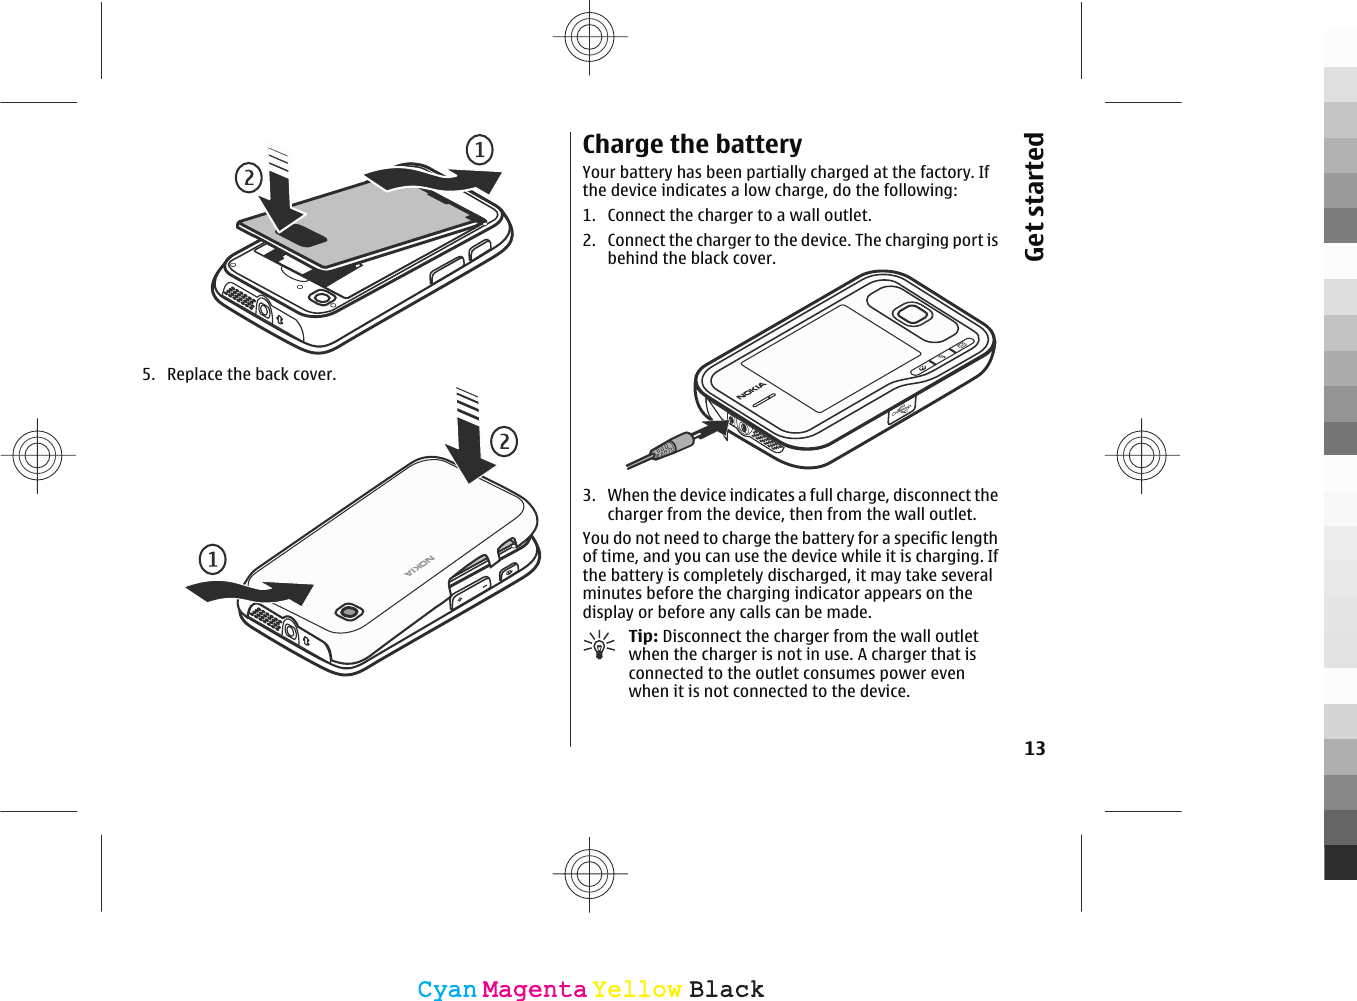 5. Replace the back cover.Charge the batteryYour battery has been partially charged at the factory. Ifthe device indicates a low charge, do the following:1. Connect the charger to a wall outlet.2. Connect the charger to the device. The charging port isbehind the black cover.3. When the device indicates a full charge, disconnect thecharger from the device, then from the wall outlet.You do not need to charge the battery for a specific lengthof time, and you can use the device while it is charging. Ifthe battery is completely discharged, it may take severalminutes before the charging indicator appears on thedisplay or before any calls can be made.Tip: Disconnect the charger from the wall outletwhen the charger is not in use. A charger that isconnected to the outlet consumes power evenwhen it is not connected to the device.13Get startedCyanCyanMagentaMagentaYellowYellowBlackBlack